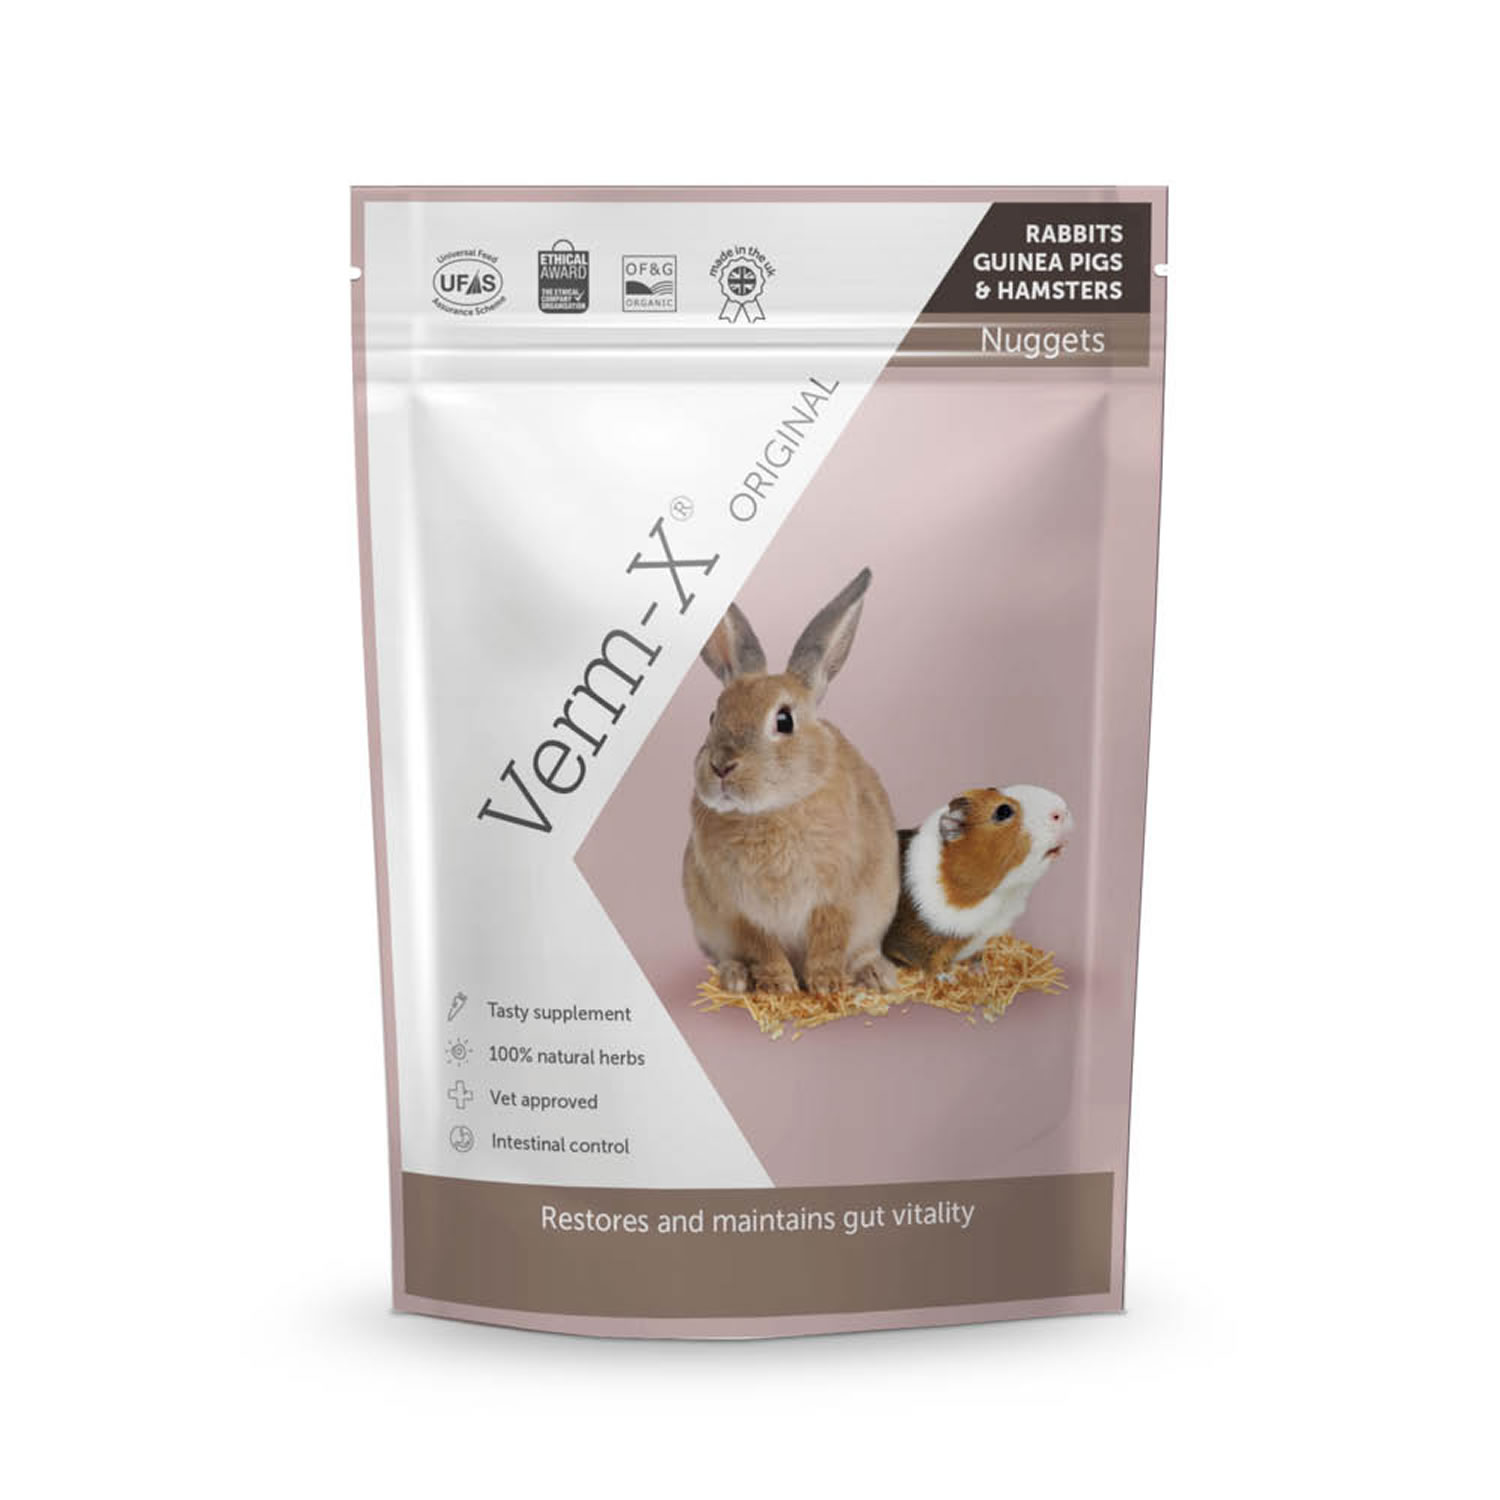 VERM-X HERBAL NUGGETS FOR RABBITS, GUINEA PIGS & HAMSTERS 180 GM POUCH 180 GM POUCH